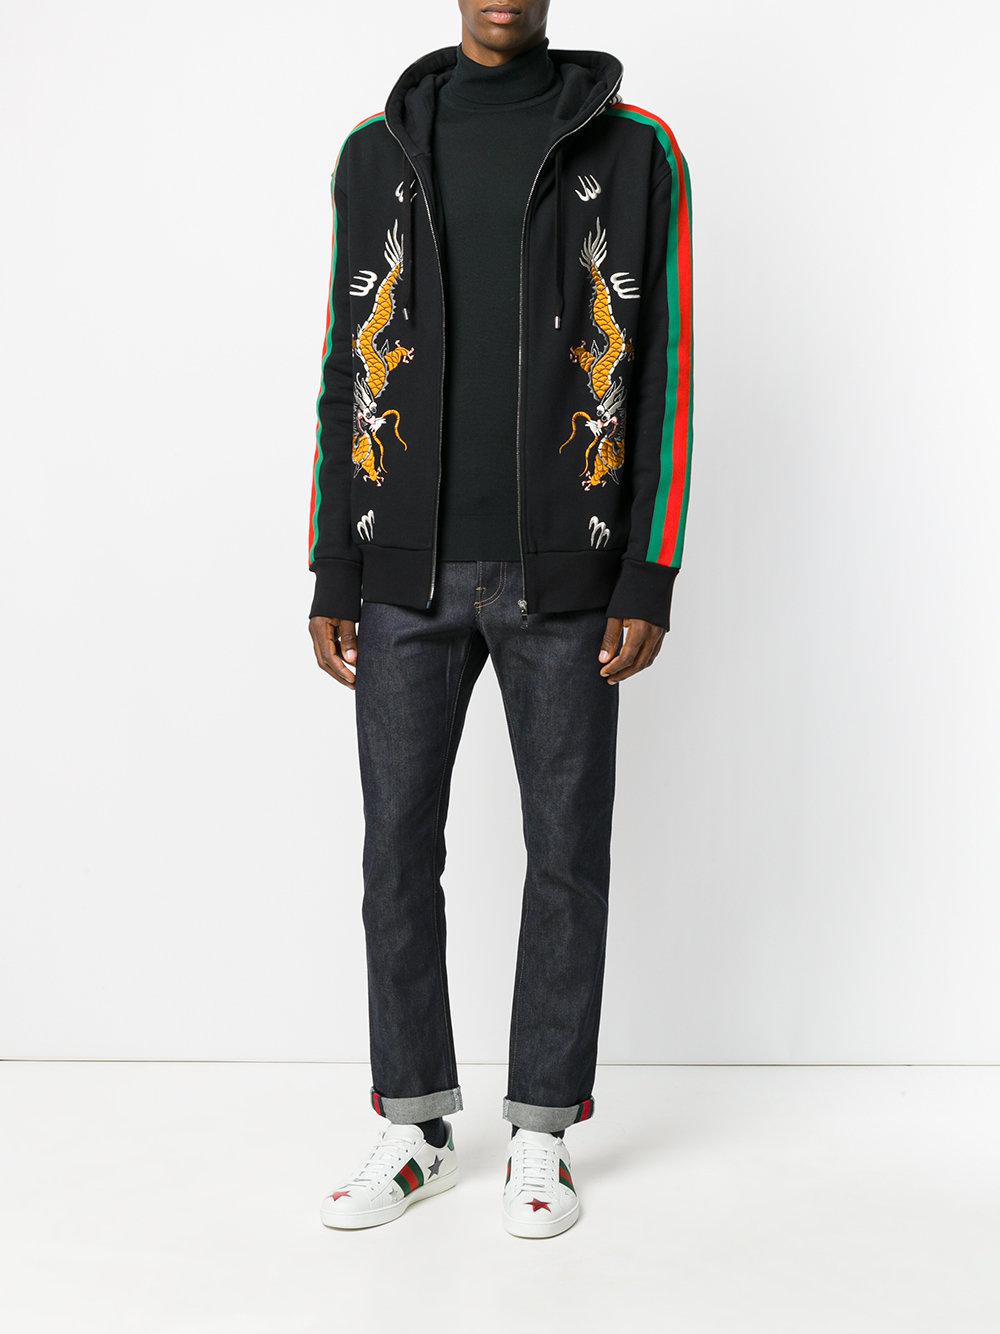 Lyst - Gucci Dragon Embroidered Zip Hoodie in Black for Men